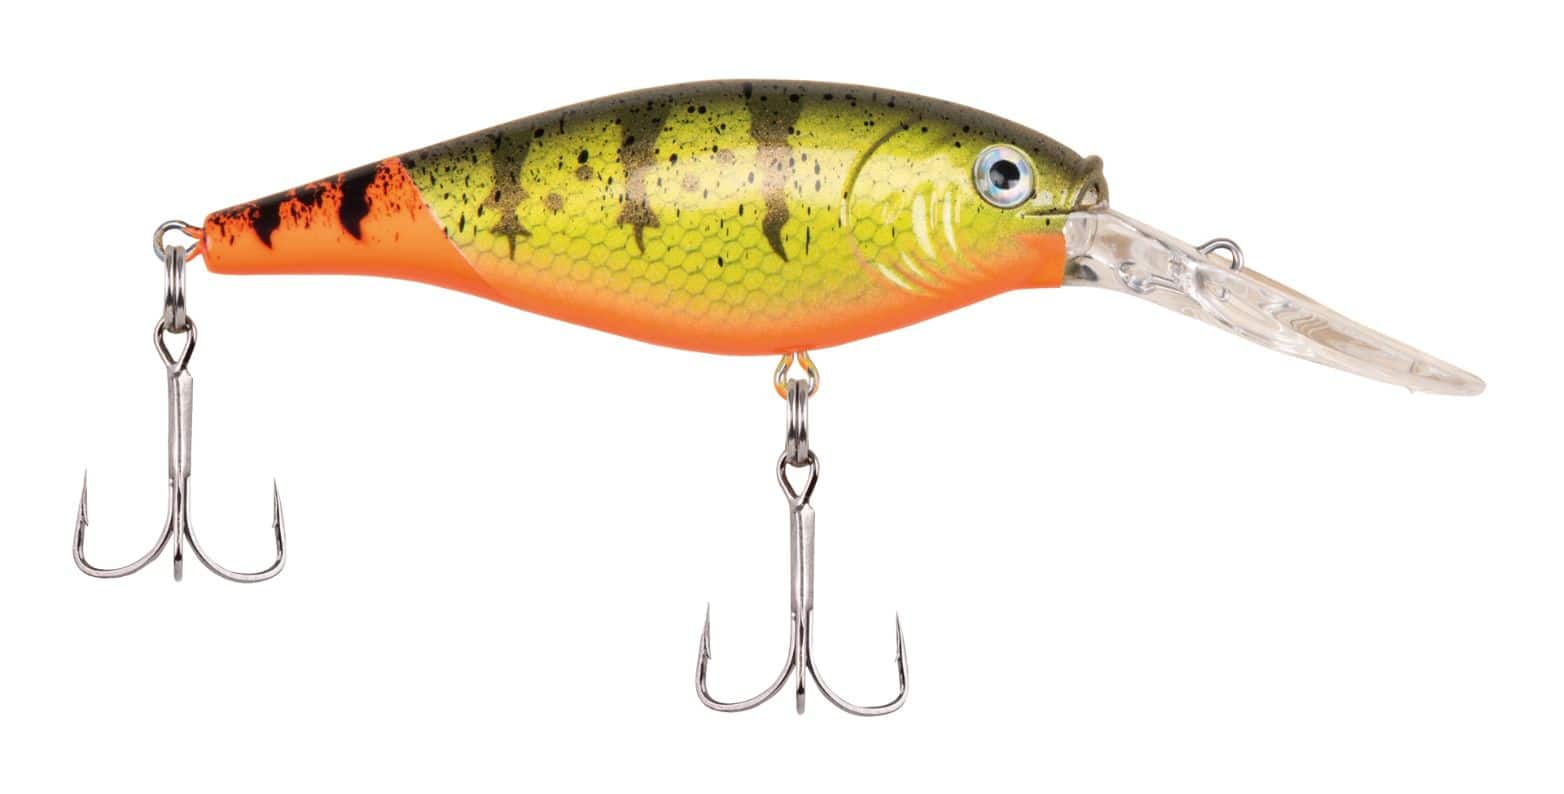 https://media-www.canadiantire.ca/product/playing/fishing/fishing-lures/0771326/berkley-flicker-shad-6-firetail-hot-perch-2bfe8a01-5bac-4841-bfa3-0305195e6152-jpgrendition.jpg